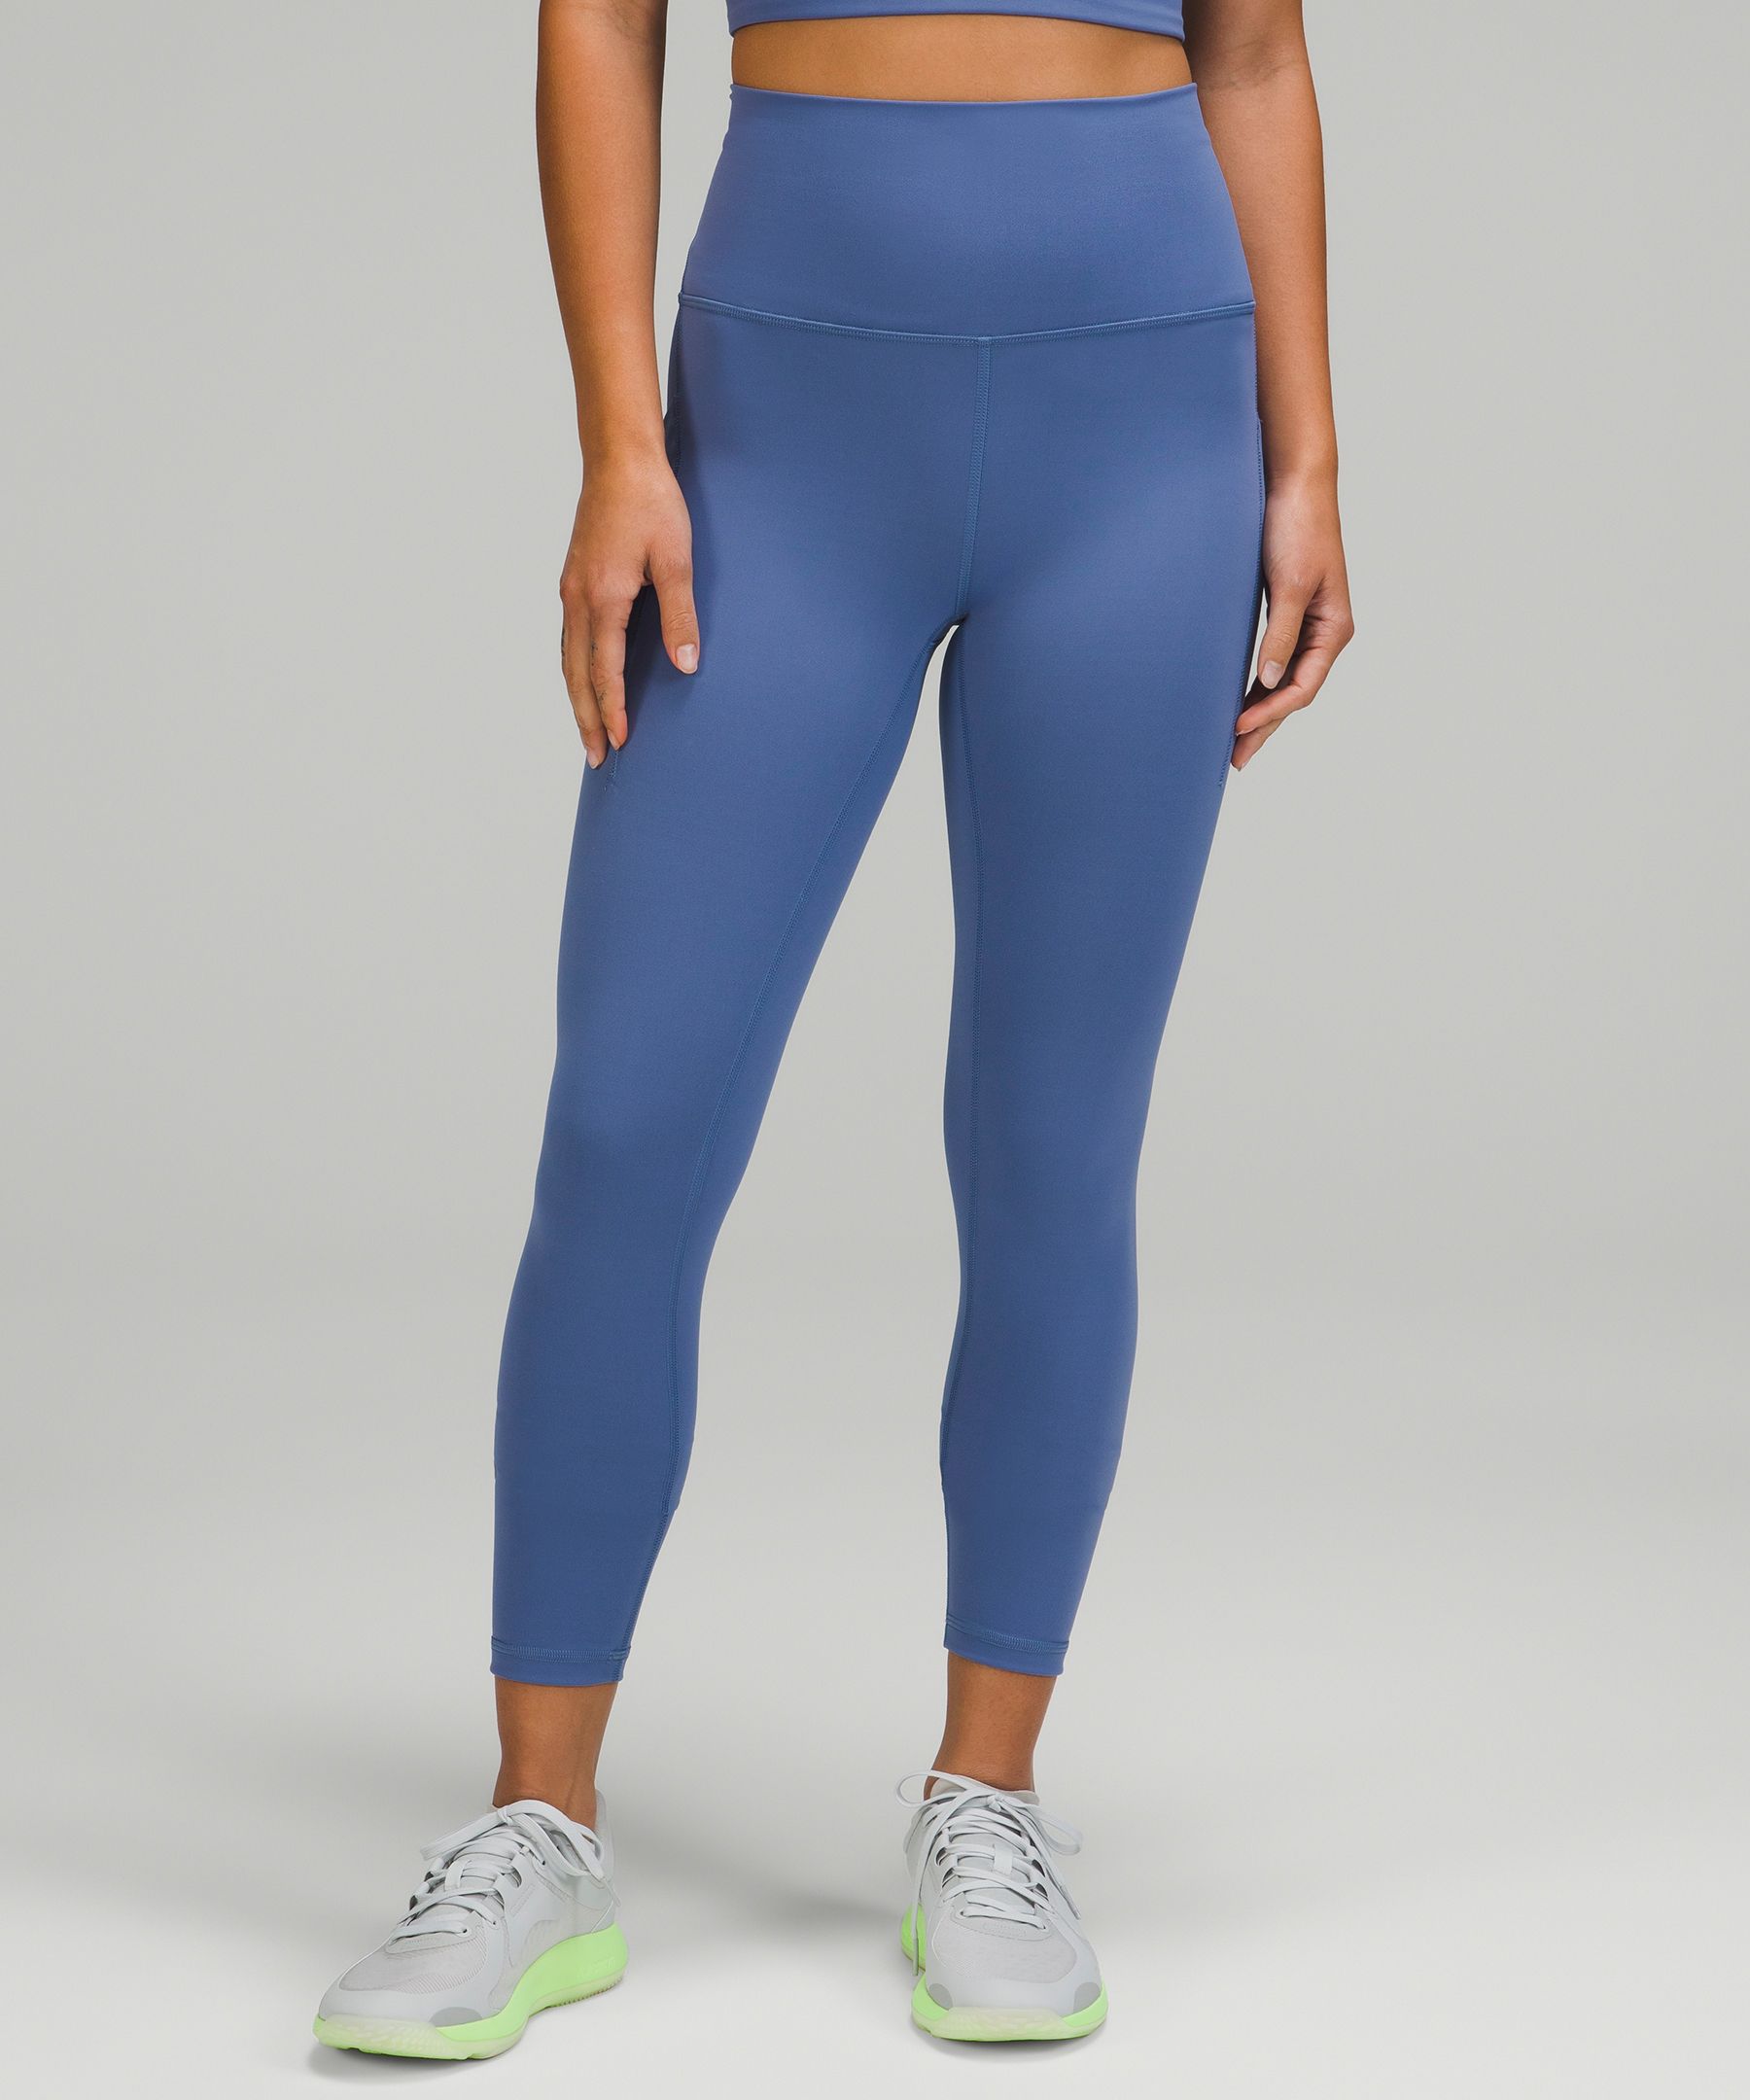 Lululemon Wunder Train High-rise Tights With Pockets 25"